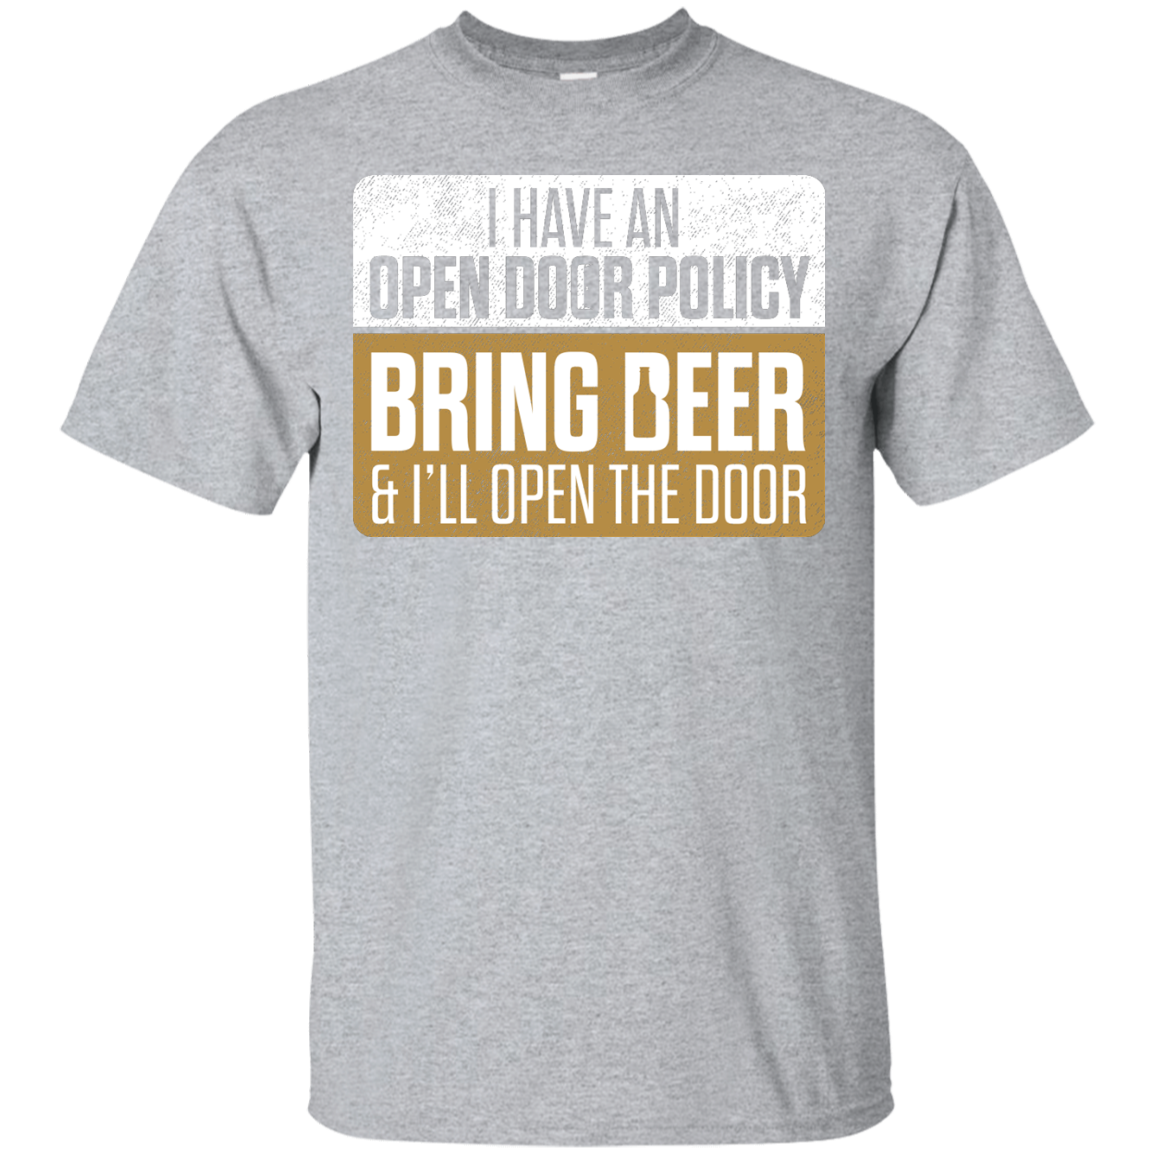 I Have An Open Door Policy T-Shirt Apparel - The Beer Lodge